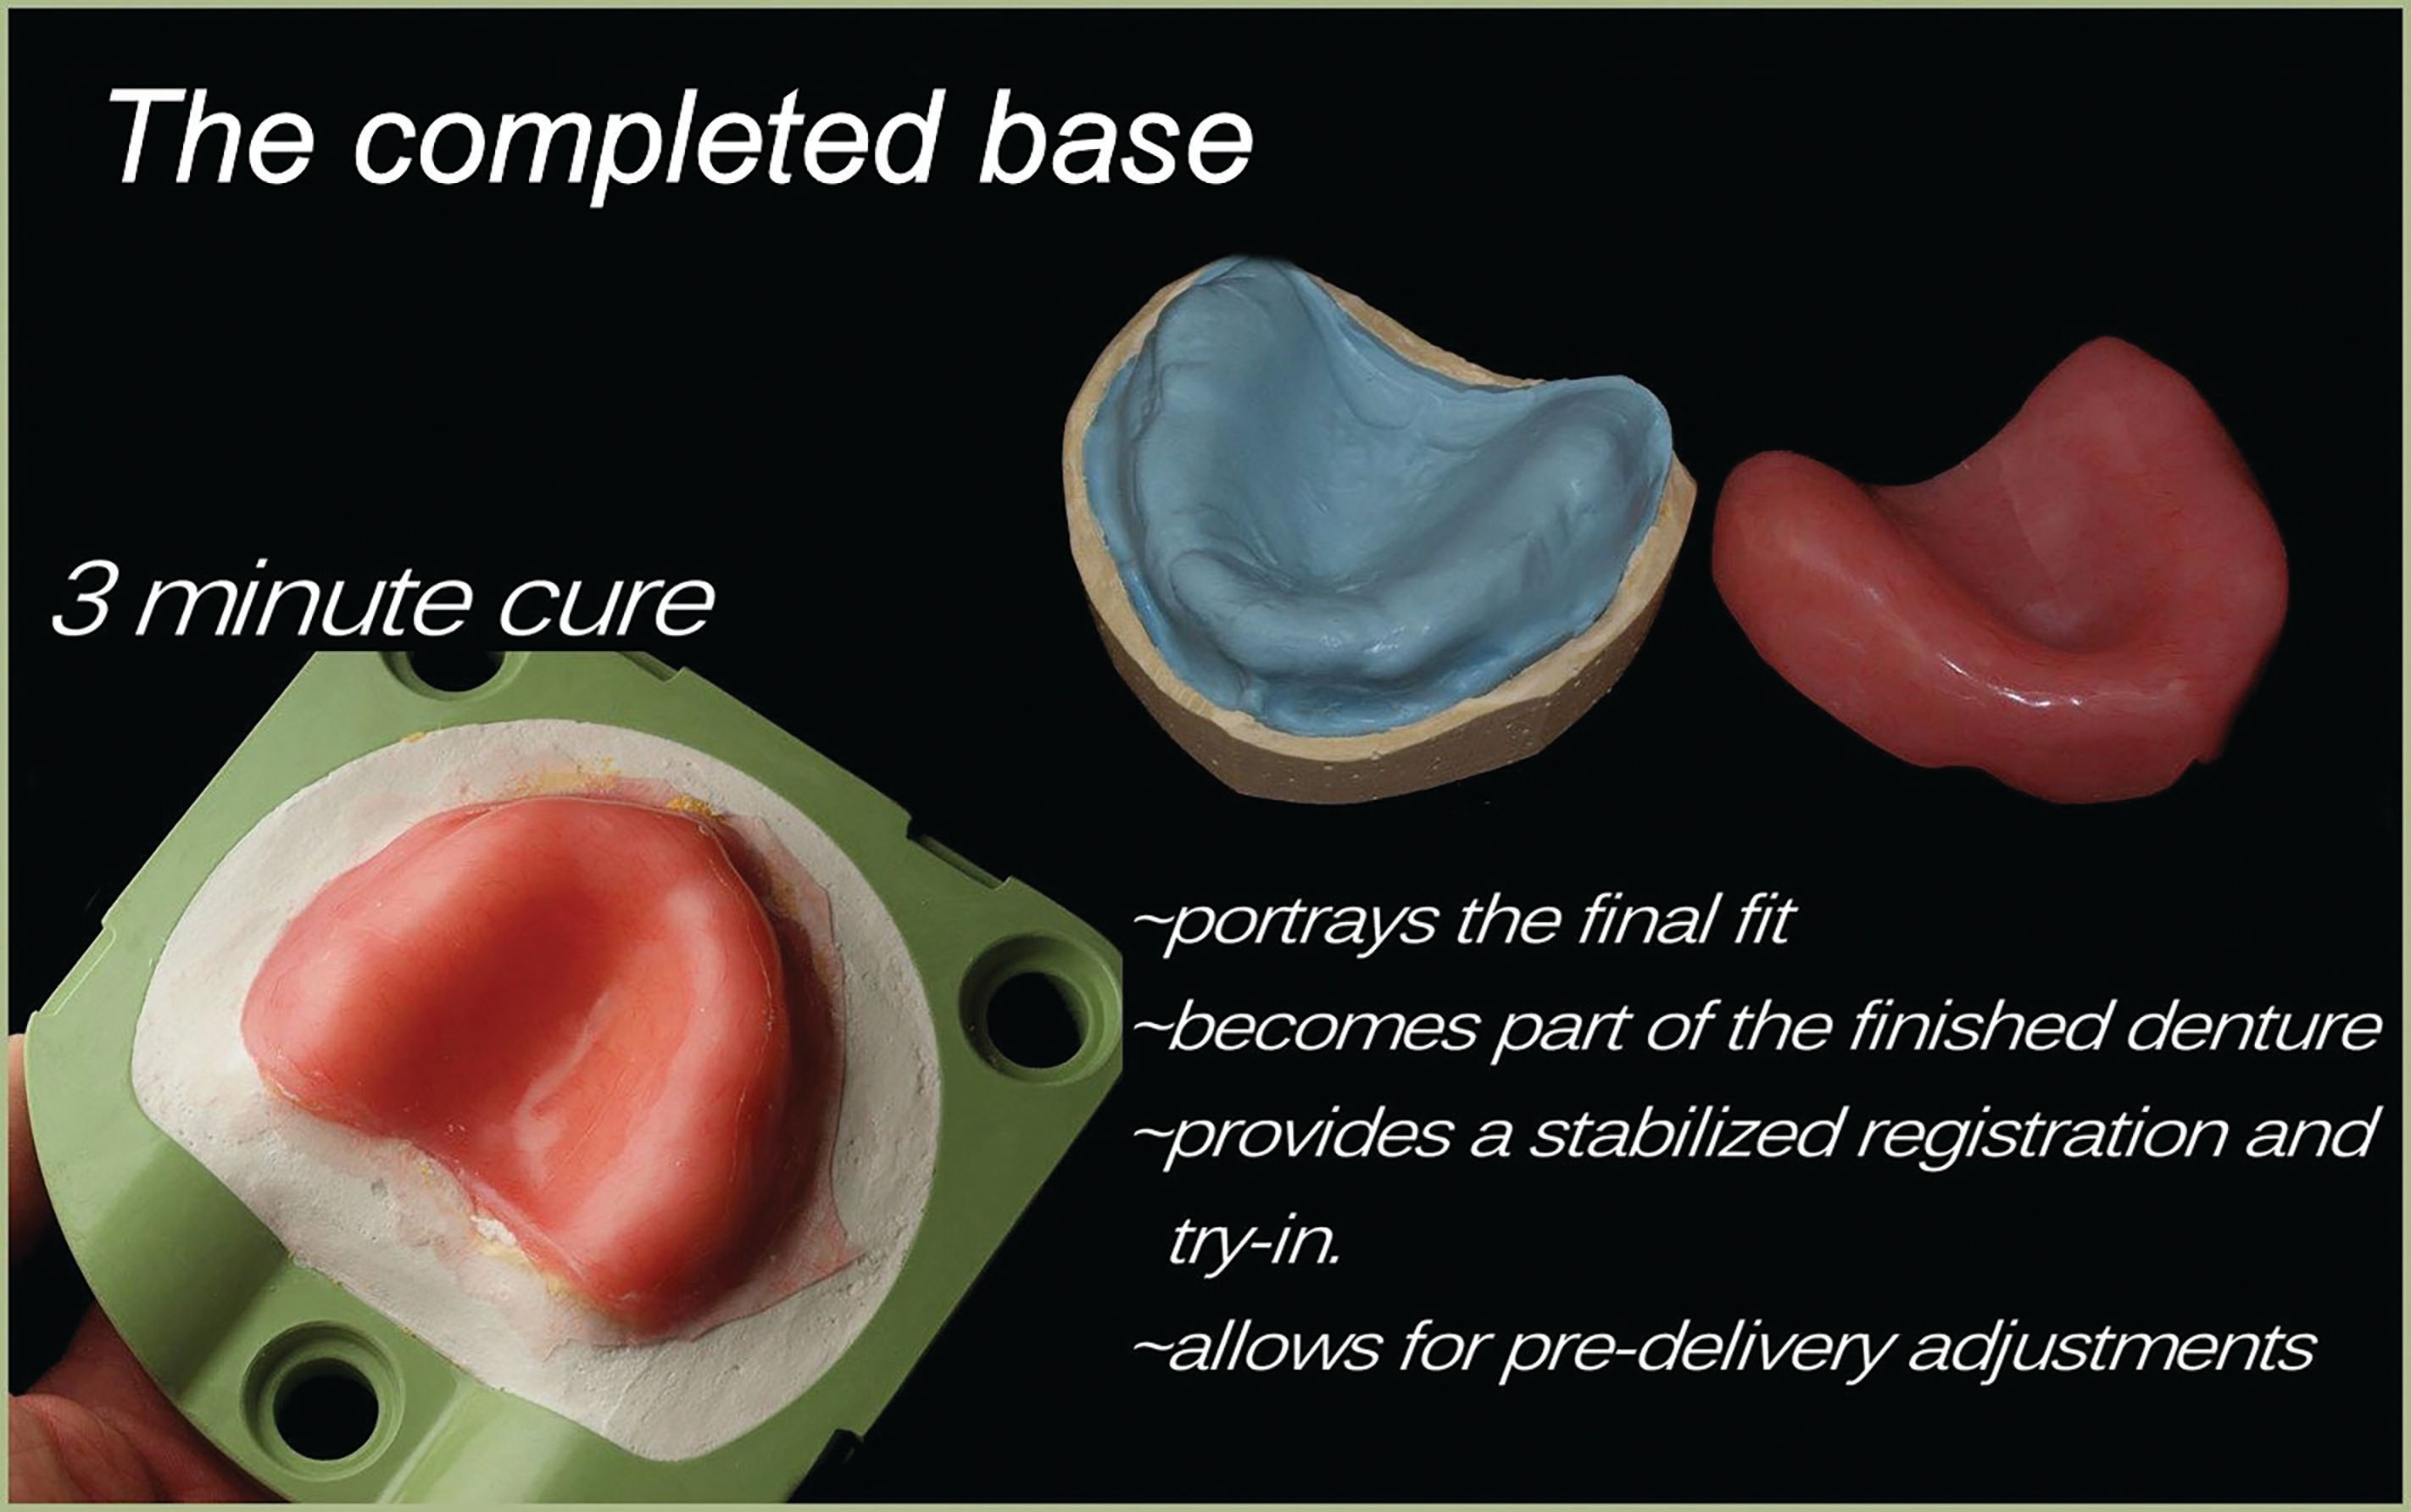 How to Achieve the Completed Denture Base